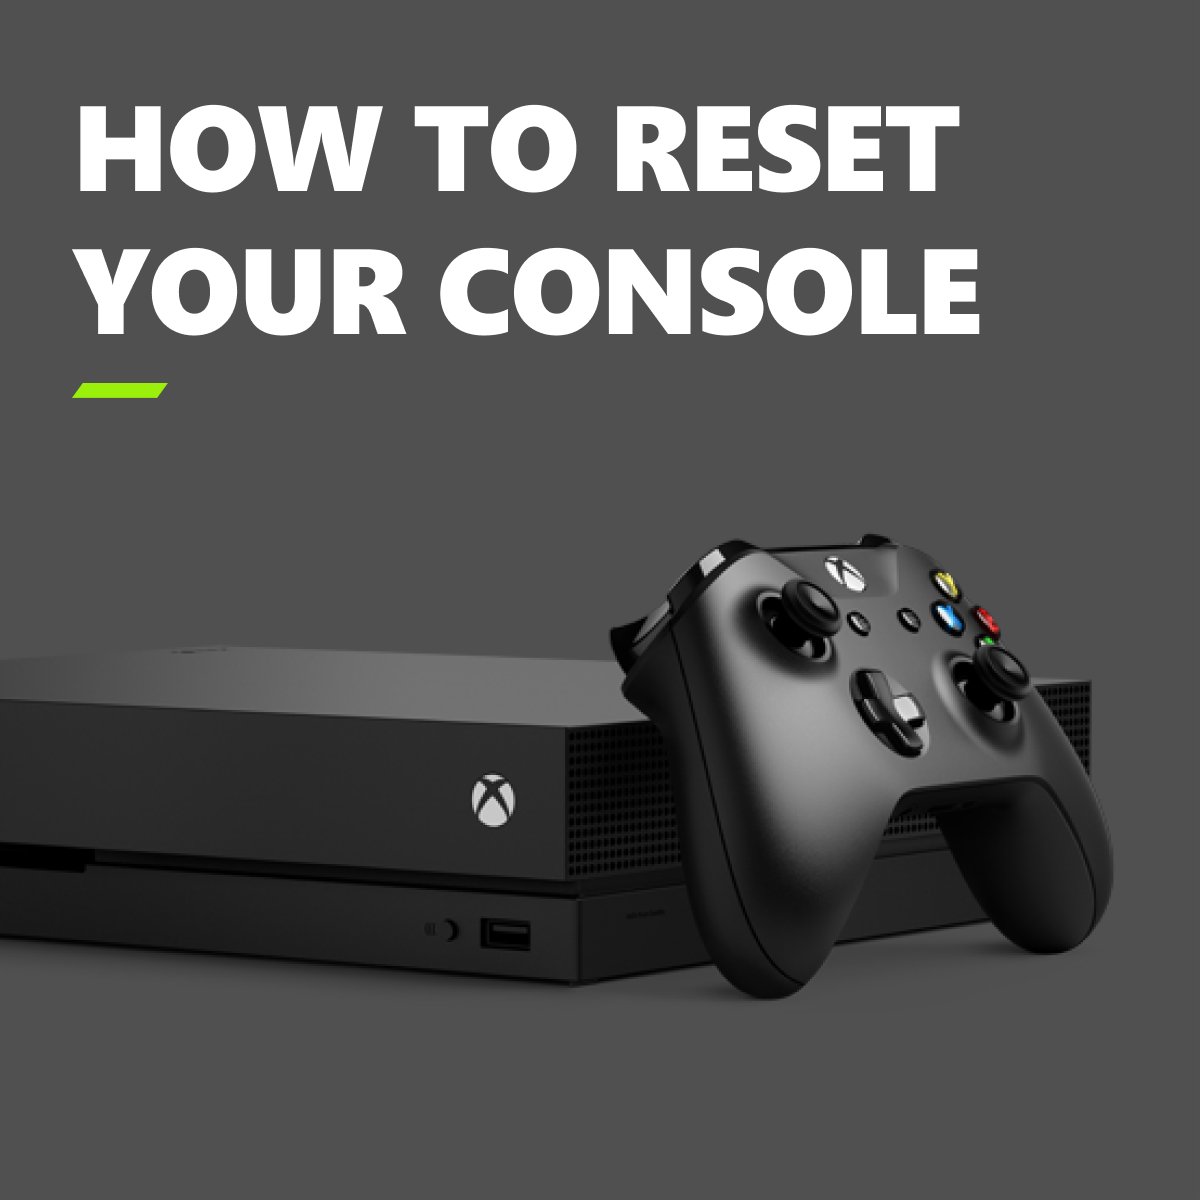 operatie Het beste Manifestatie Xbox Support on Twitter: "How to reset your console: 1. Press the Xbox  button 🎮 to open the guide 2. Select Profile &amp; system &gt; Settings  &gt; System &gt; Console info 3.